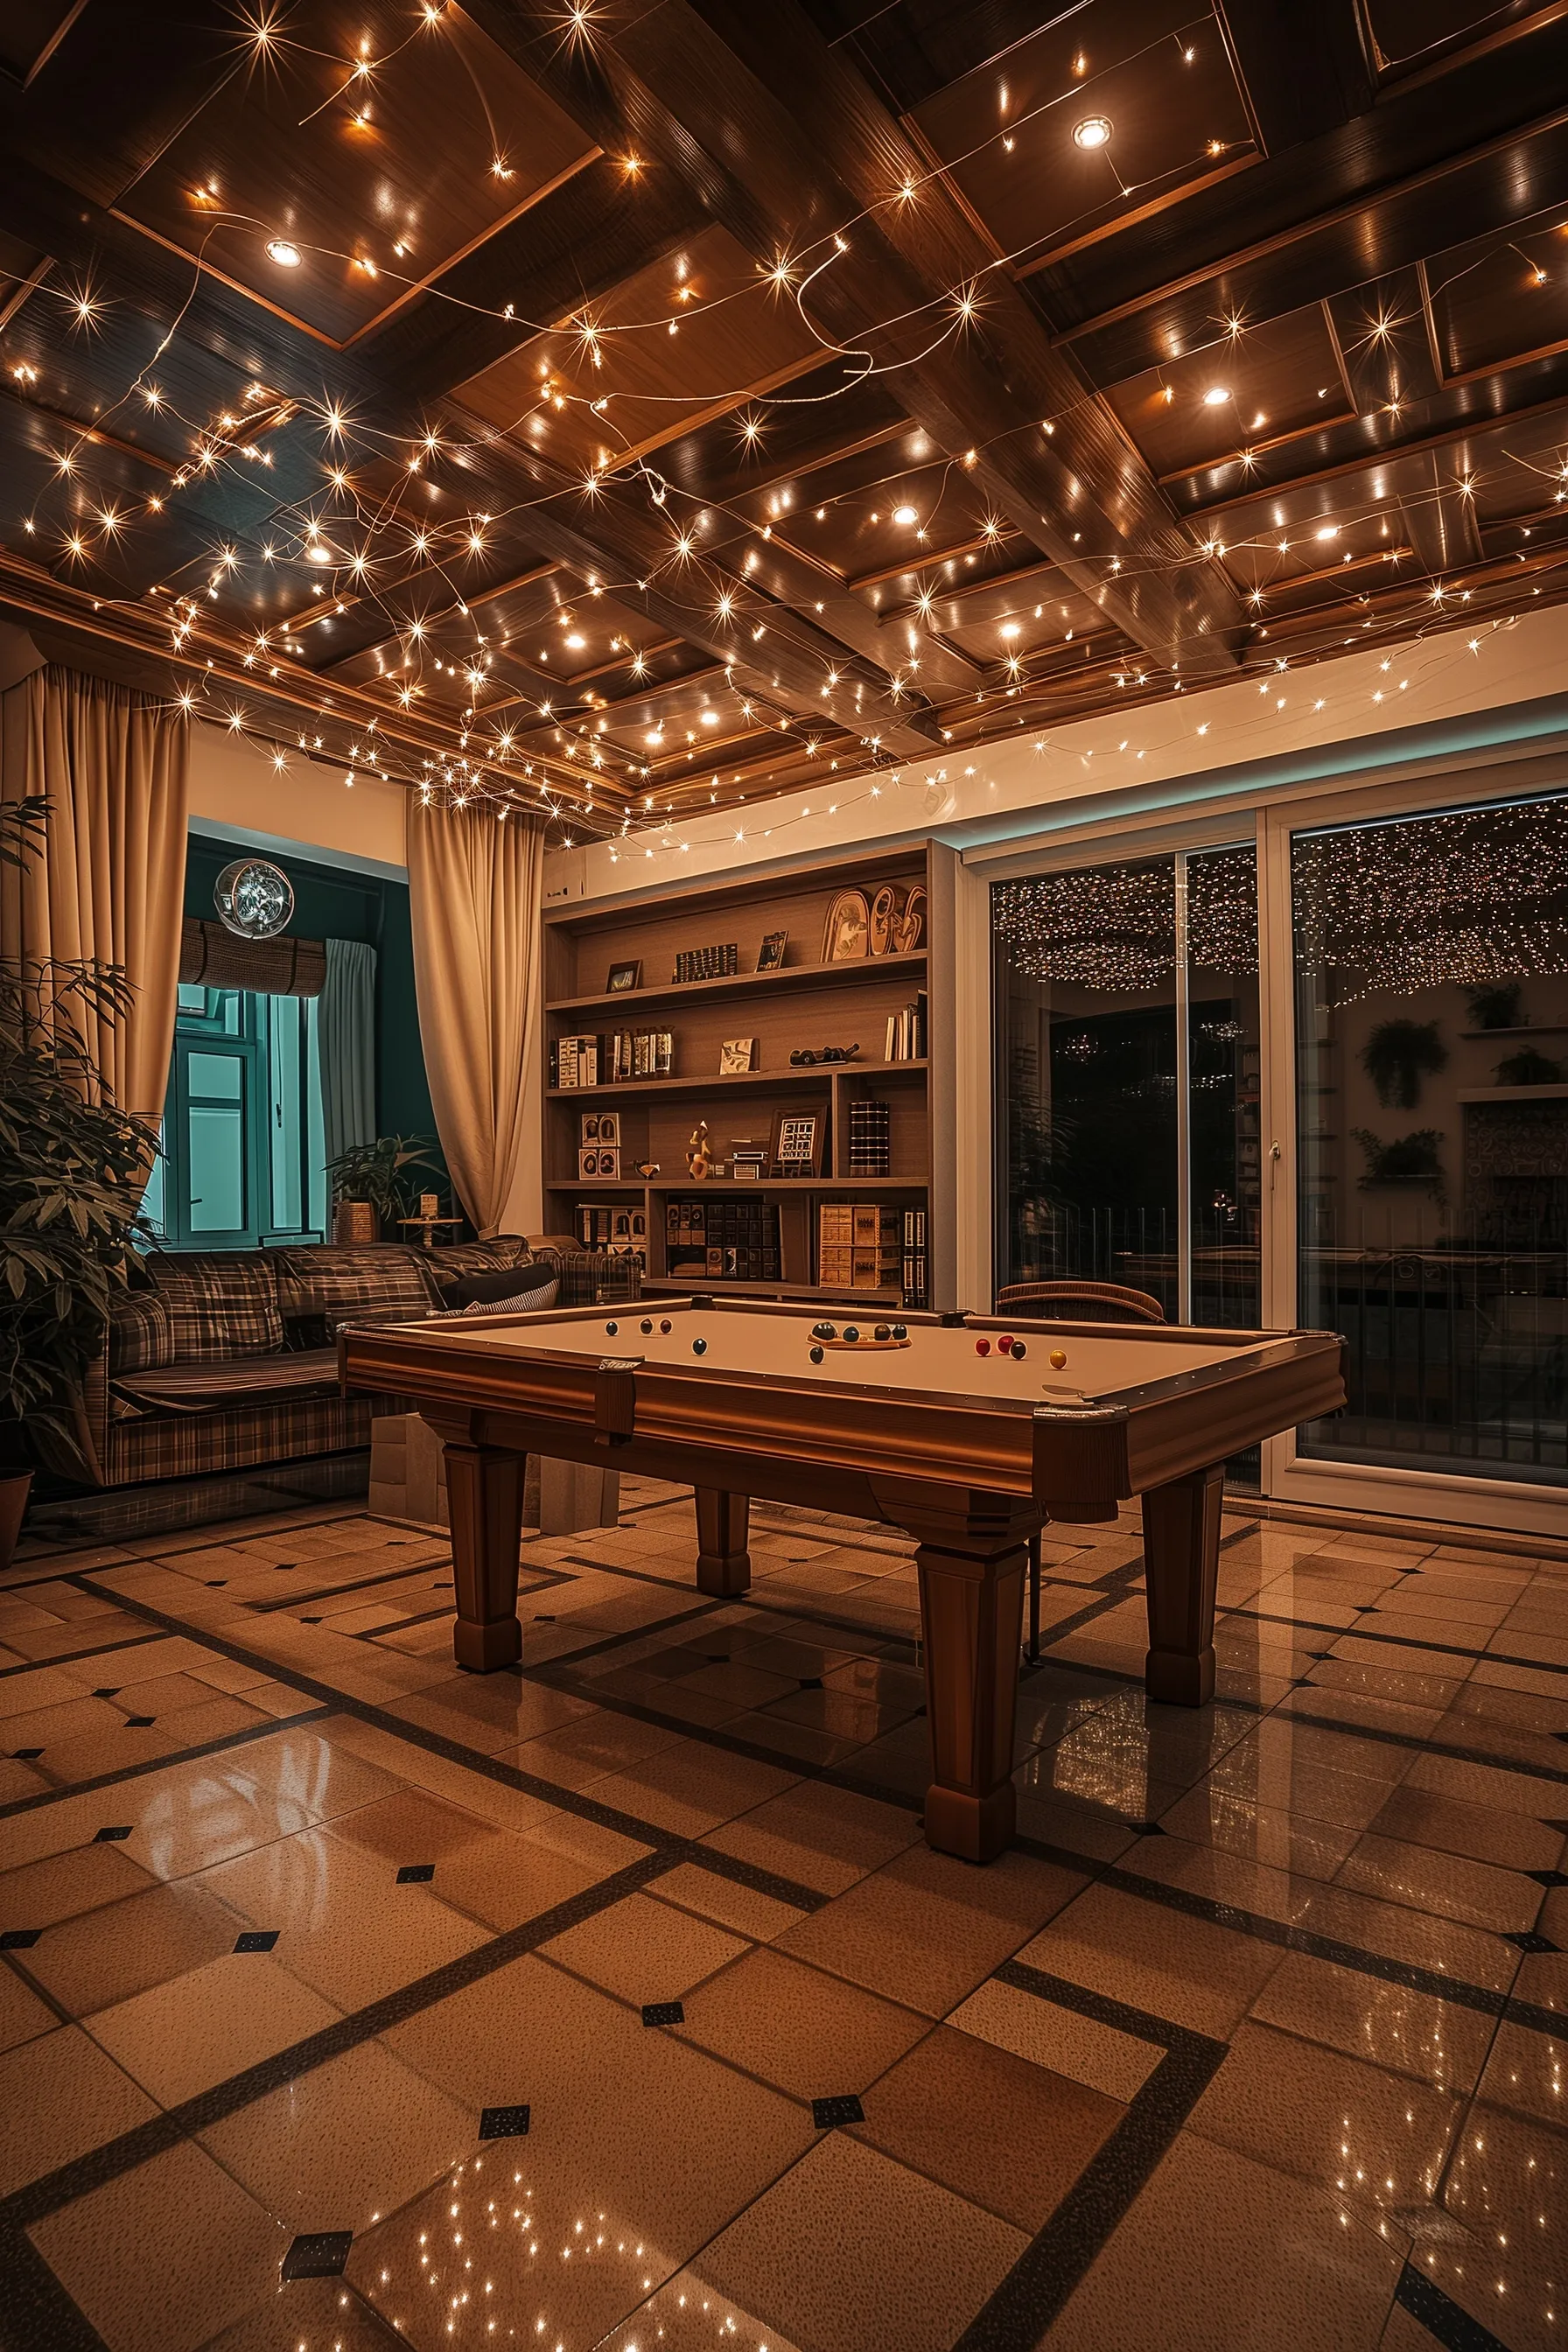 Tile floor and pool table